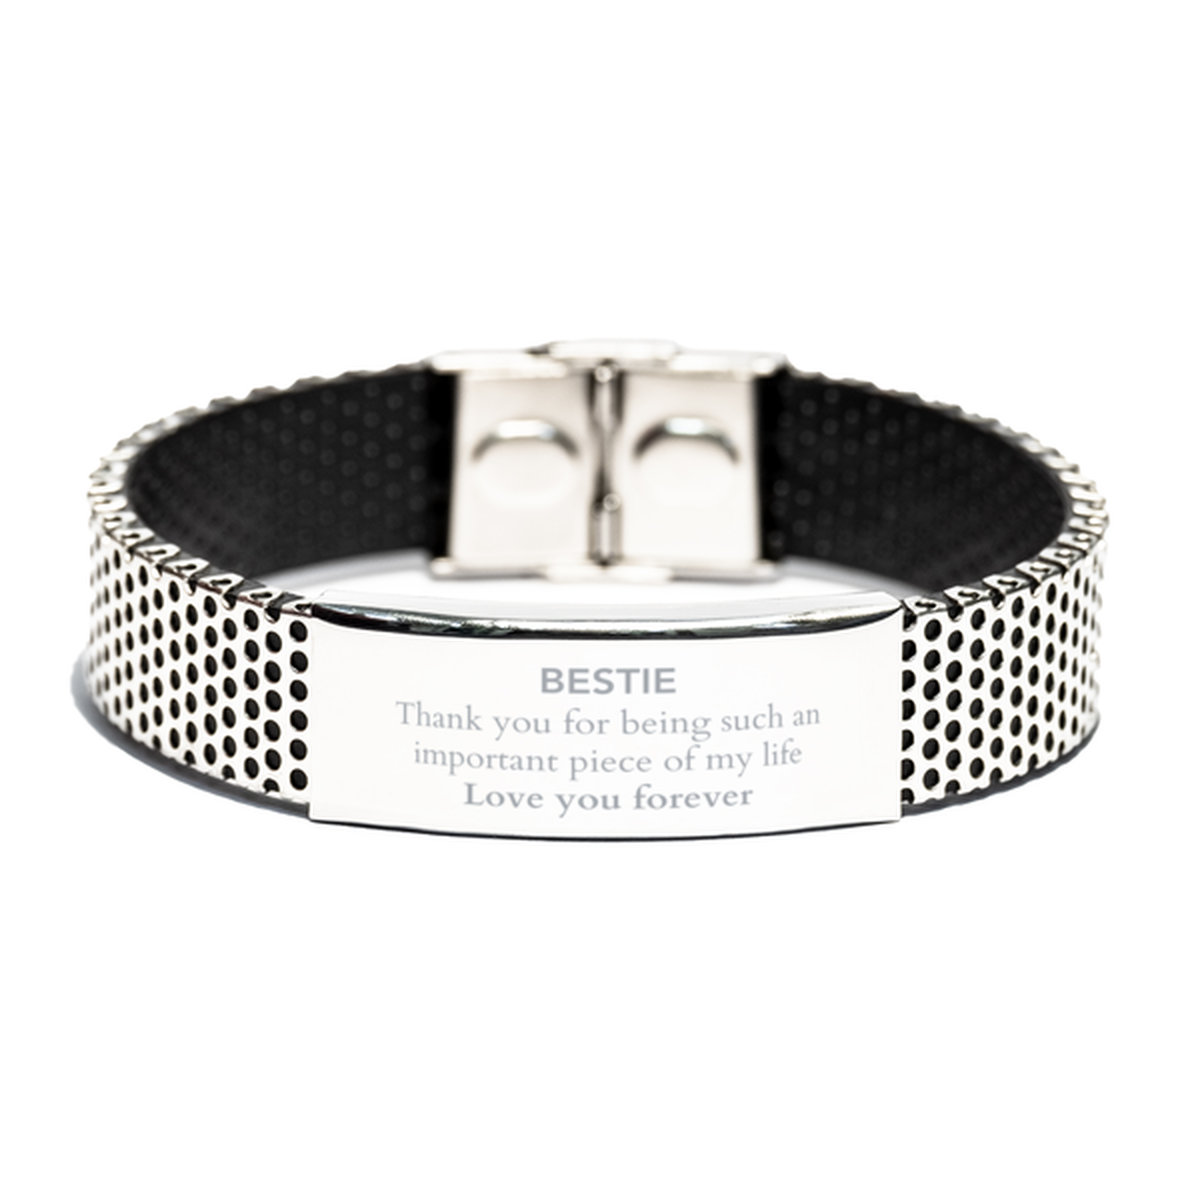 Appropriate Bestie Stainless Steel Bracelet Epic Birthday Gifts for Bestie Thank you for being such an important piece of my life Bestie Christmas Mothers Fathers Day